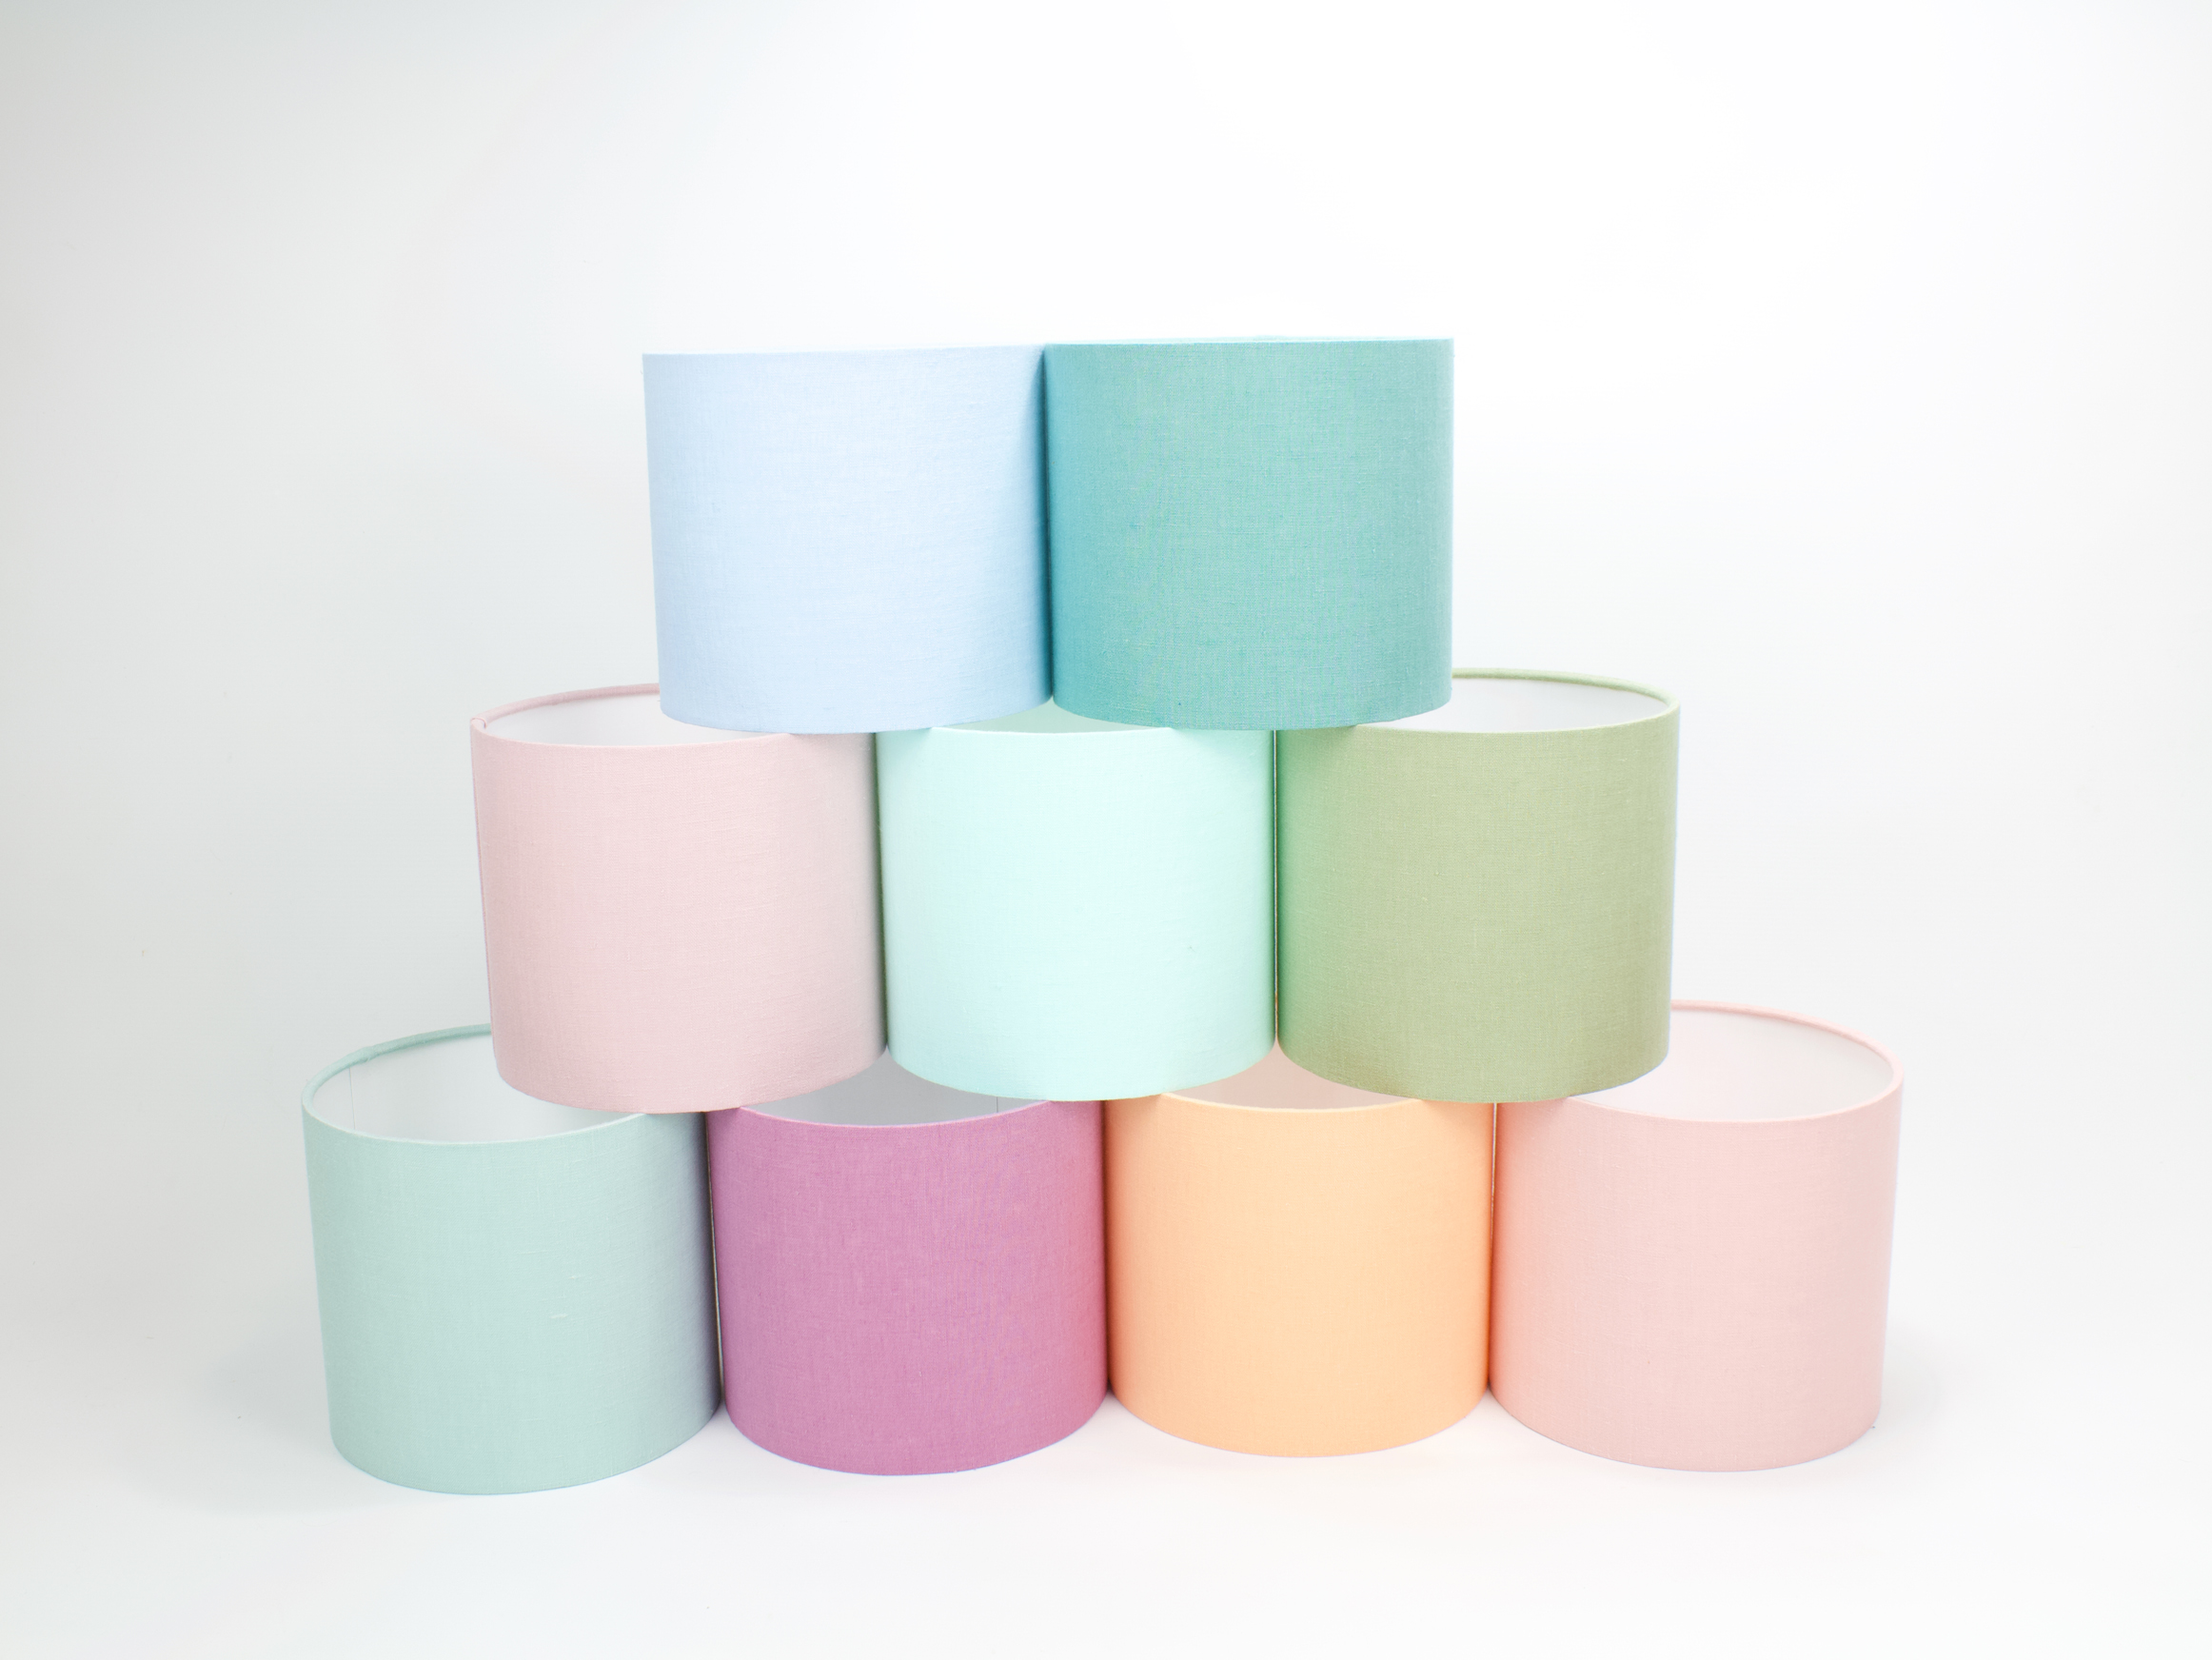 Tropicala Pastel Linen Lampshades, Large & Small Lamp Shades in Stonewashed Linen Fabric, from £24, Etsy